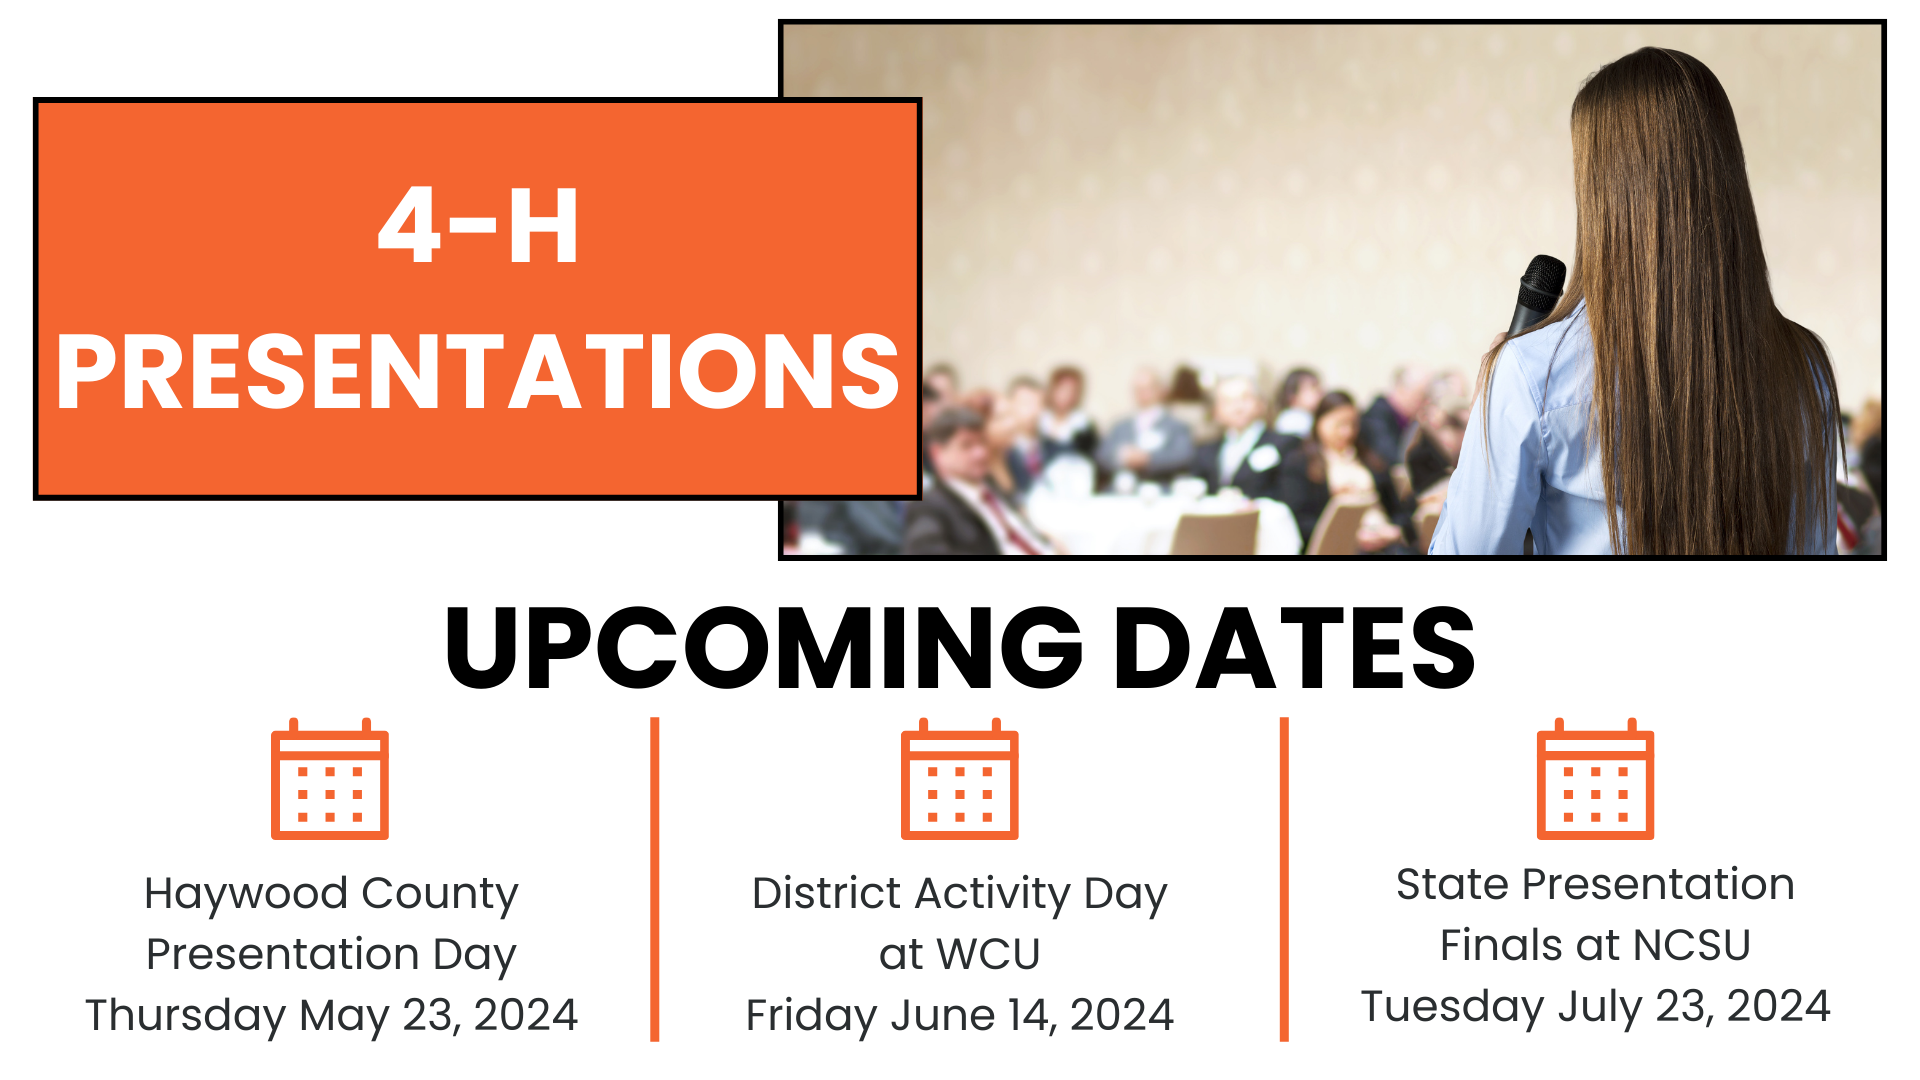 Upcoming dates for 4-H Presentations listed. 4-H Presentations written in white on an orange background with a picture of a girl giving a presentation to an audience beside it.